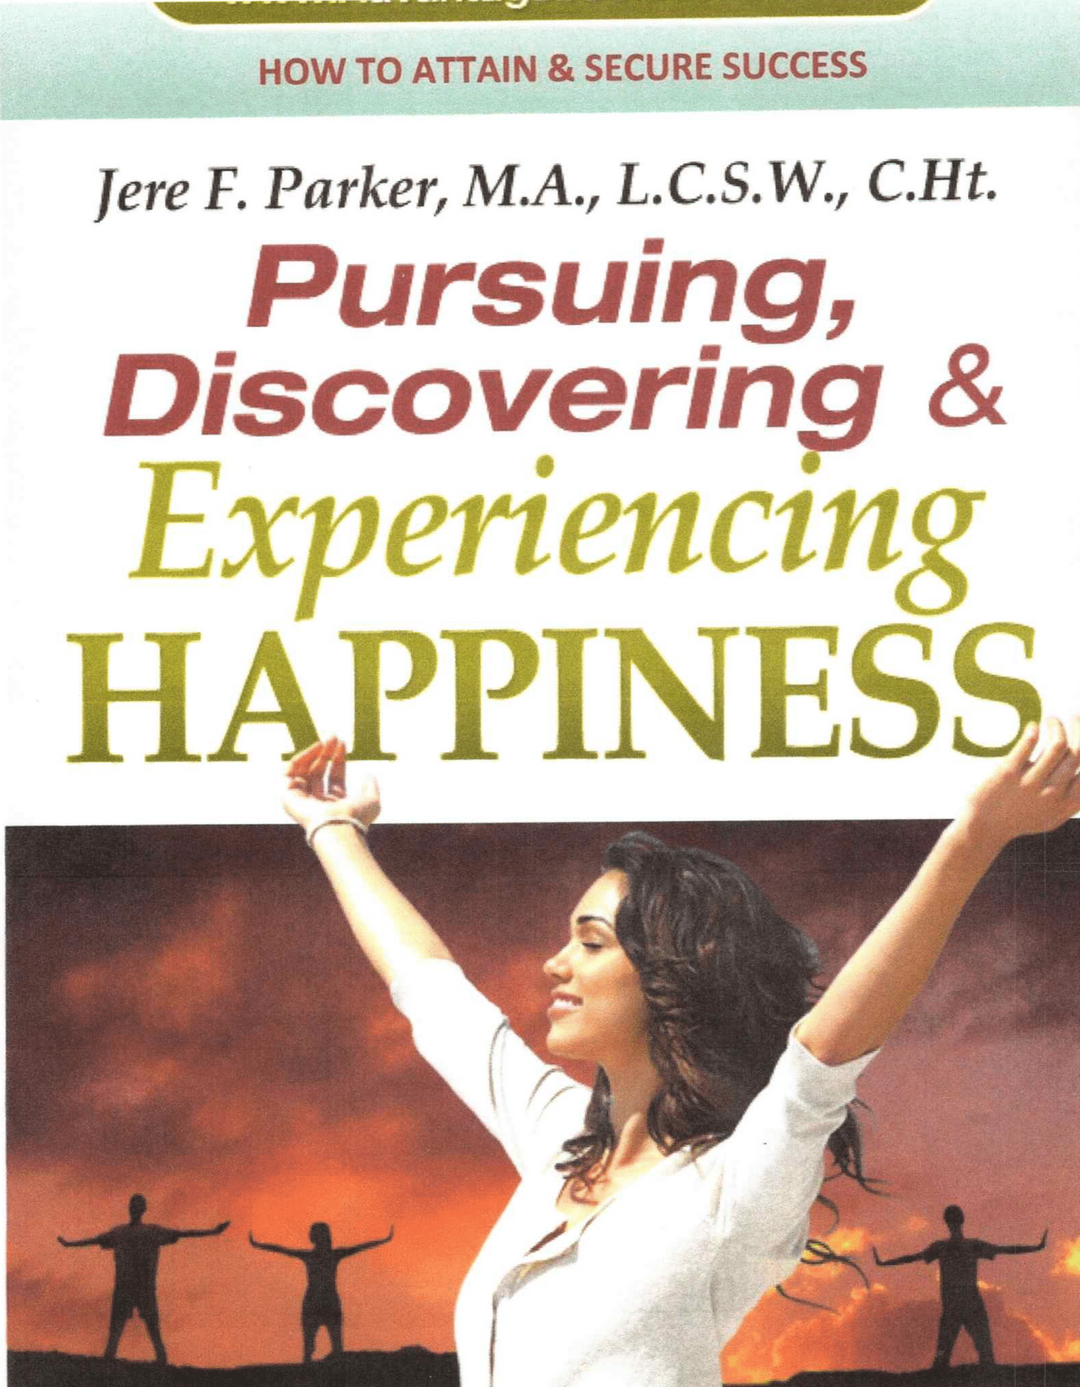 Pursuing, Discovering & Experiencing Happiness